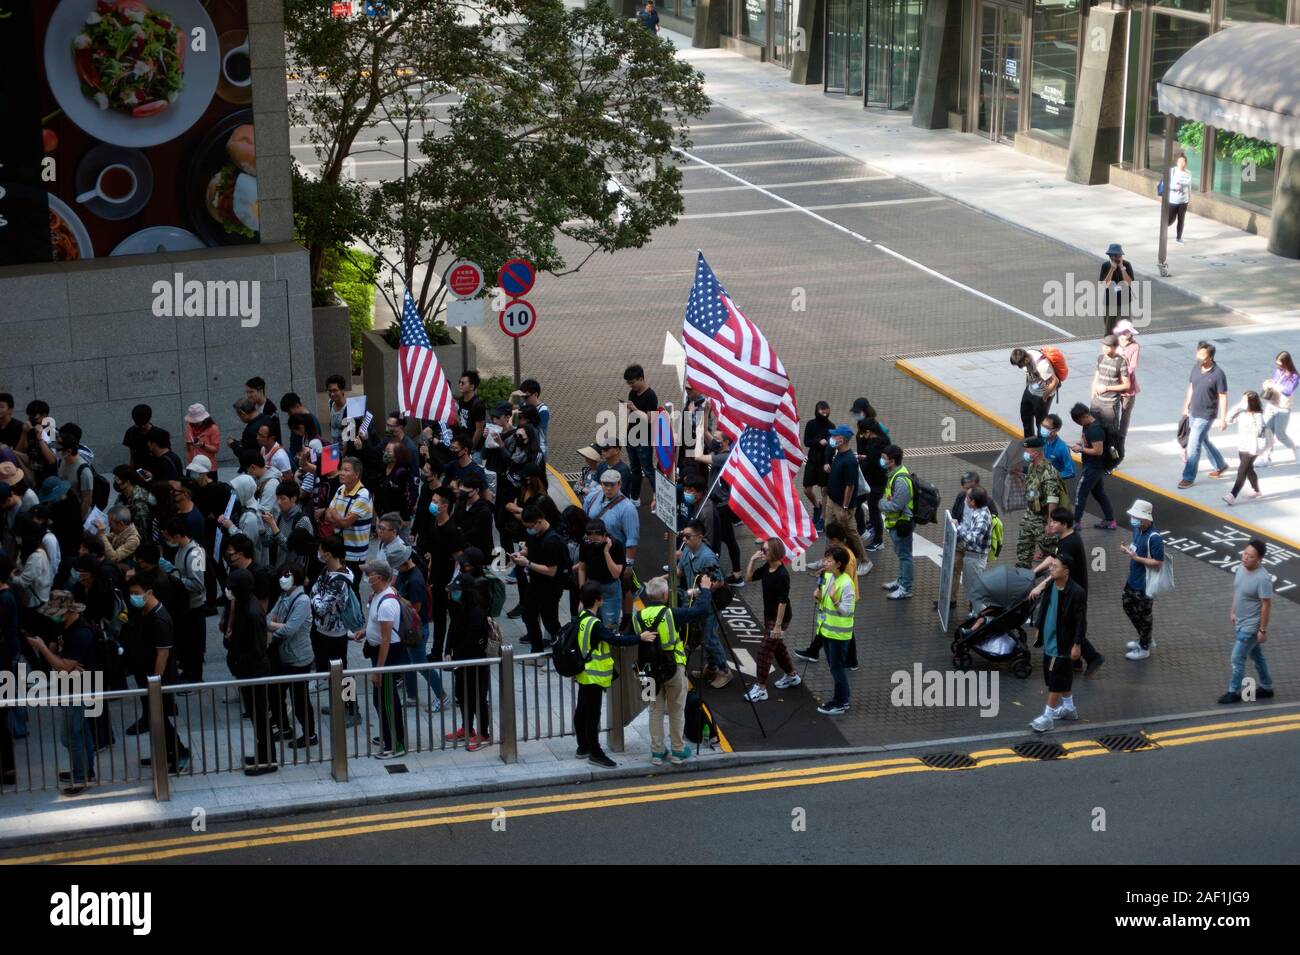 Hong Kong protesters carry the Stars & Stripes flag in support of the USA against the Chinese government and the CPC,Hong Kong, China, South East Asia Stock Photo